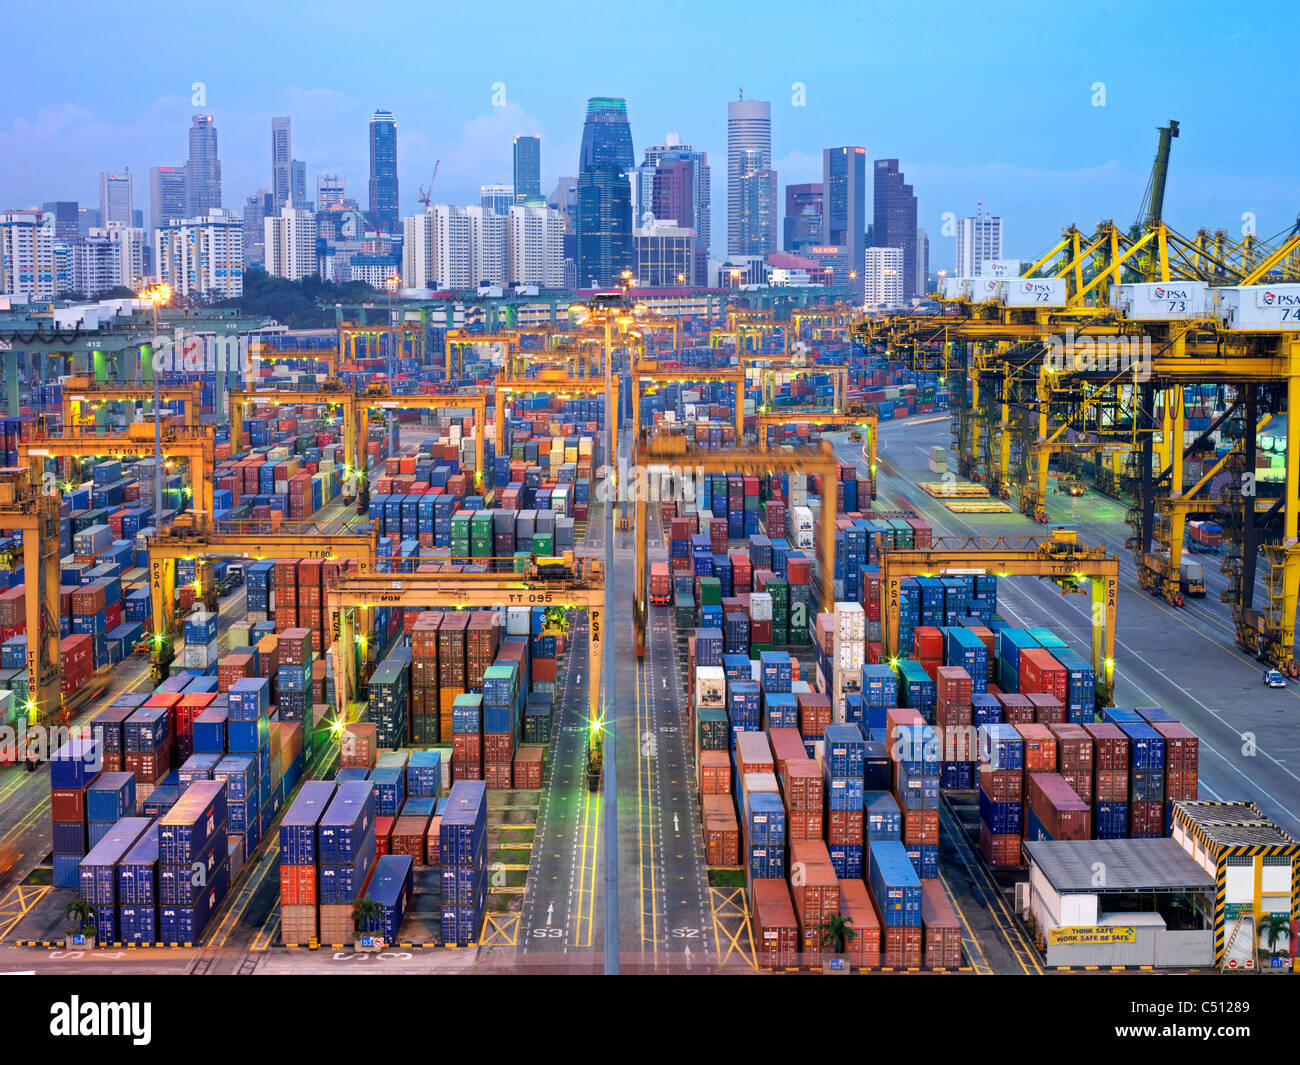 An evening view of a Singapore container terminal just after dusk with the contrast of the city in the background Stock Photo